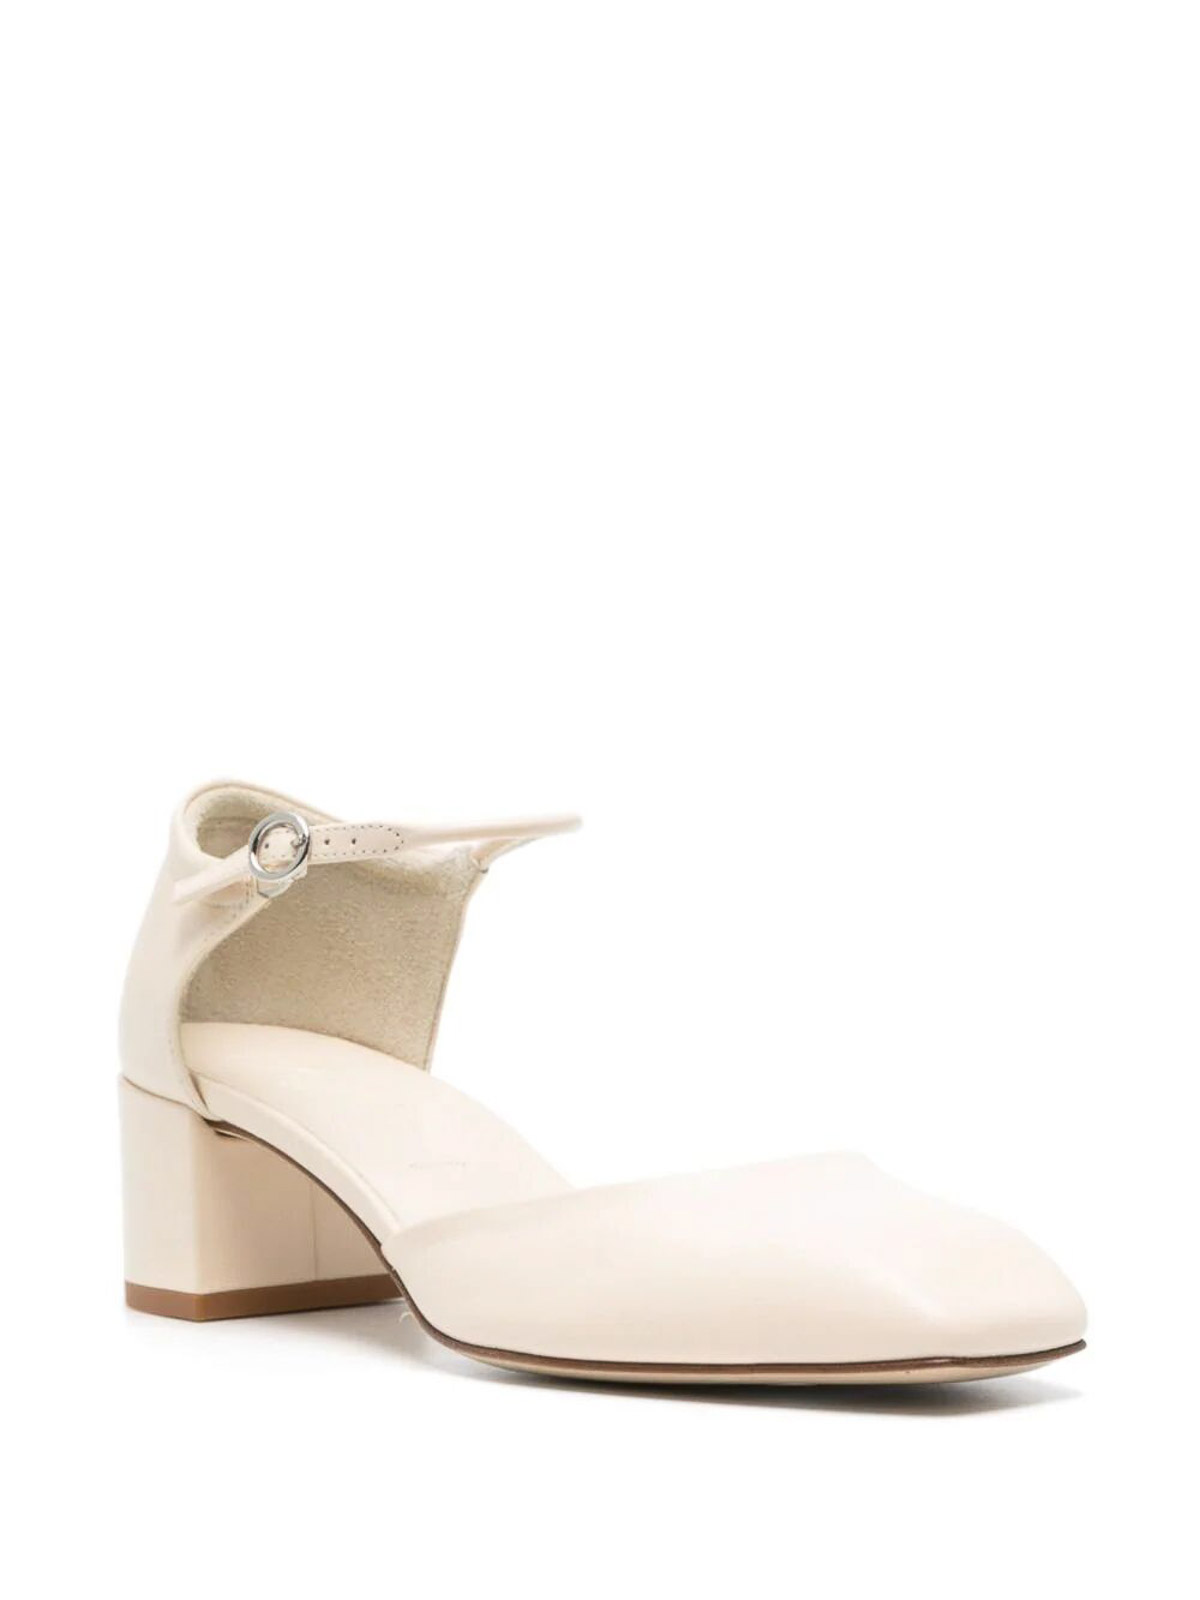 Shop Aeyde Magda Shoes In Nude & Neutrals